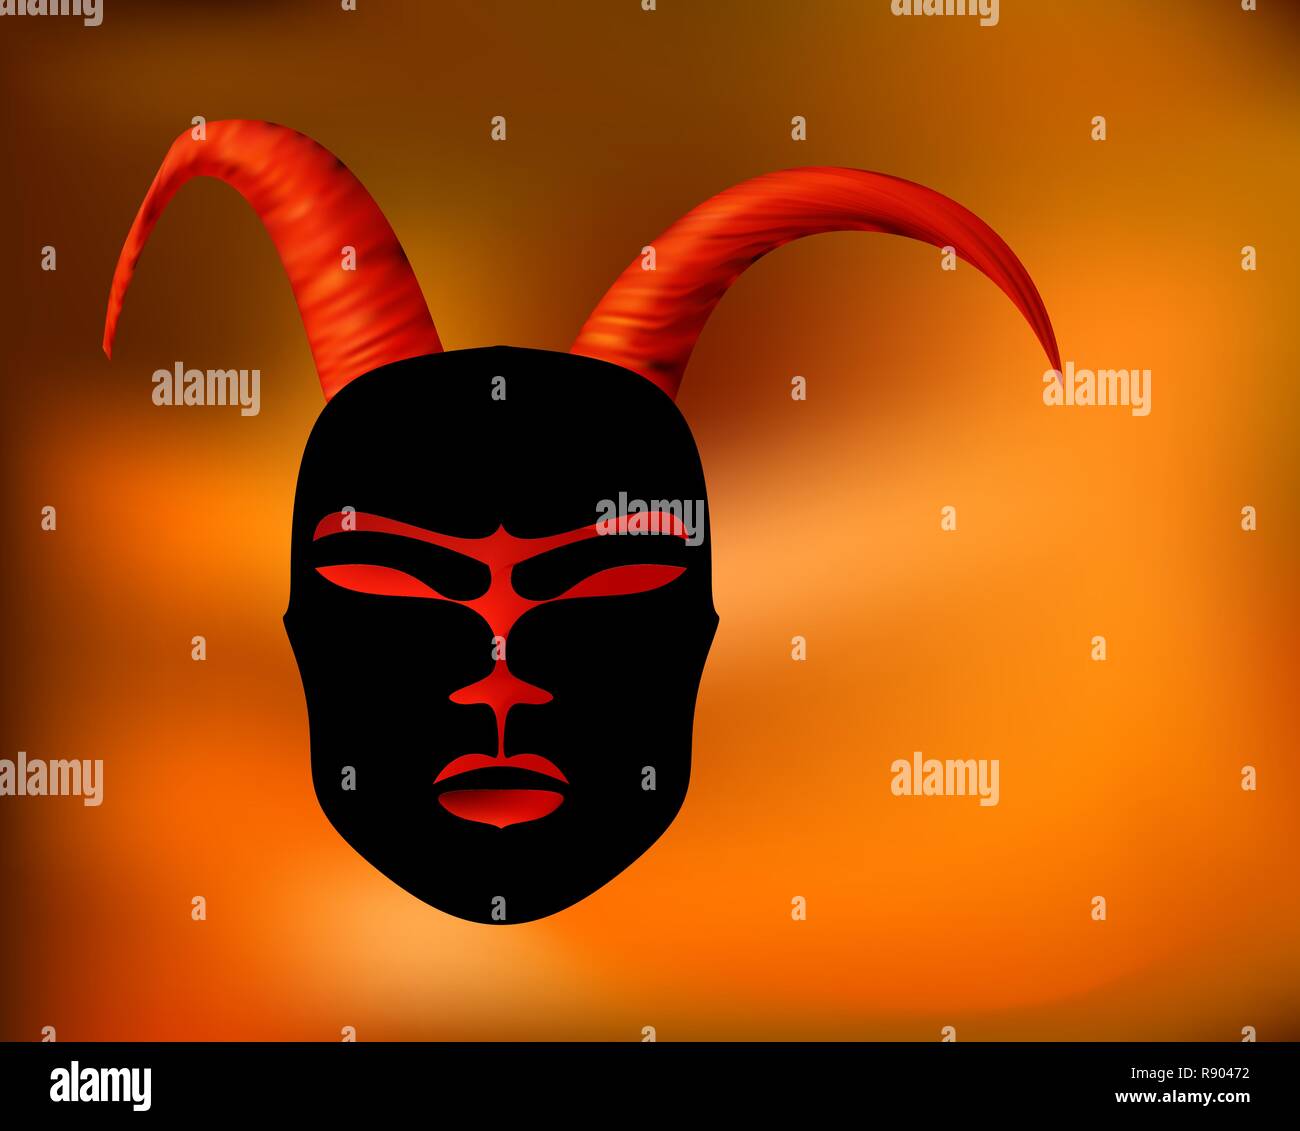 Shaman africa Stock Vector Images - Alamy